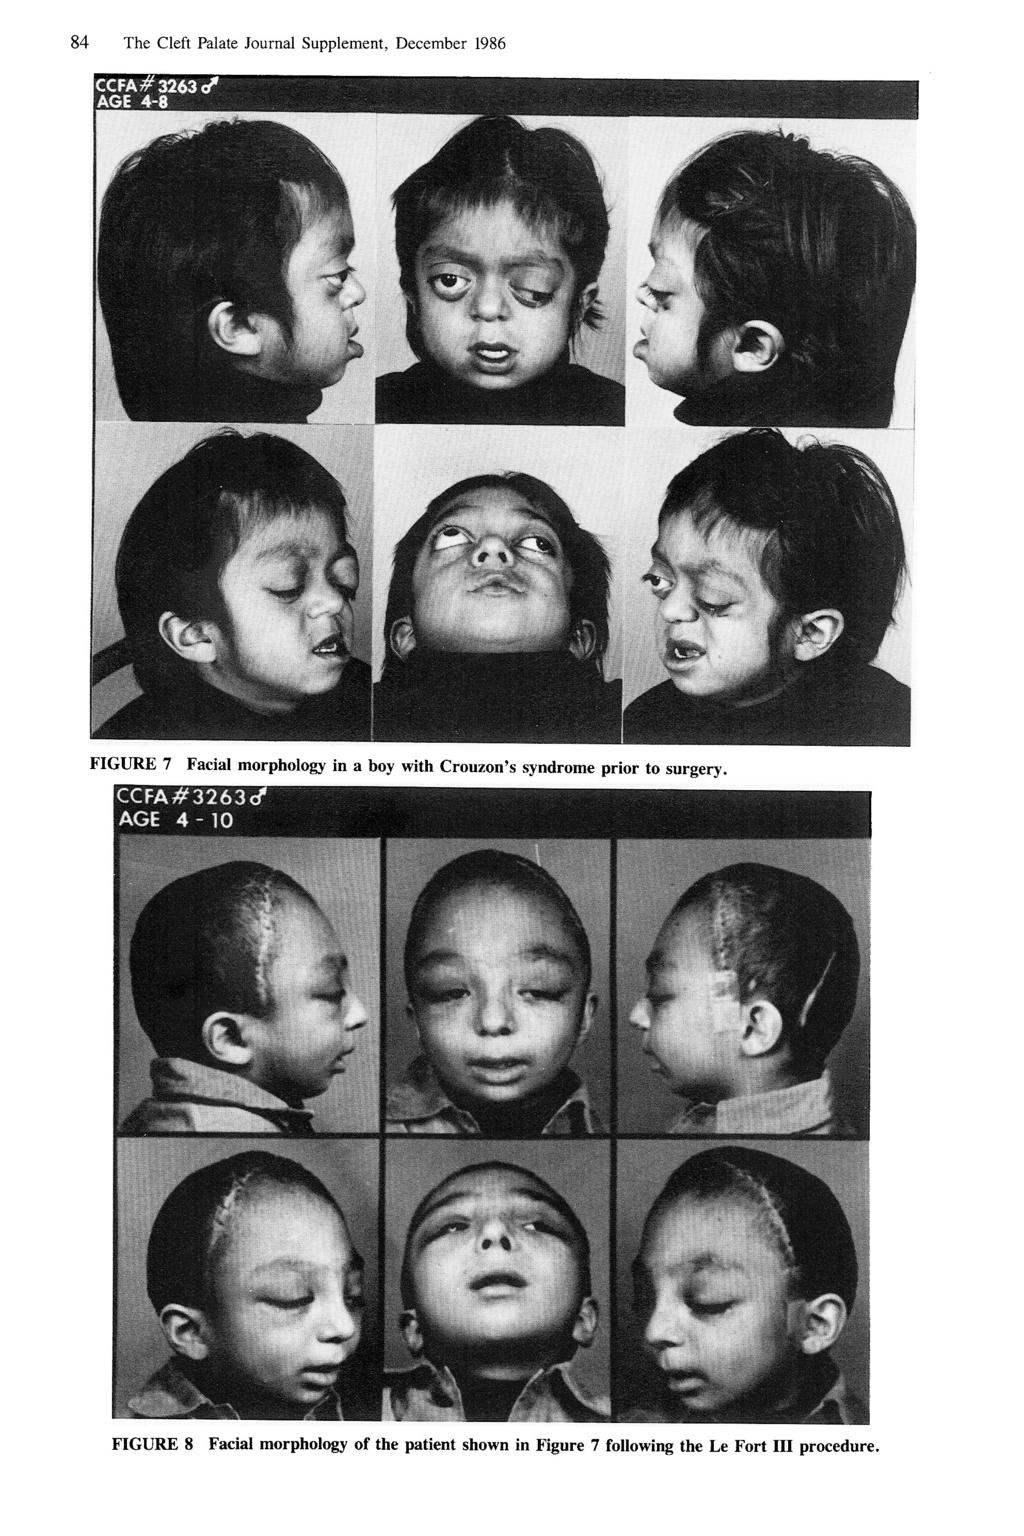 84 The Cleft Palate Journal Supplement, December 1986 Cccra# 3263 5 AGE 4-8 FIGURE 7 Facial morphology in a boy with